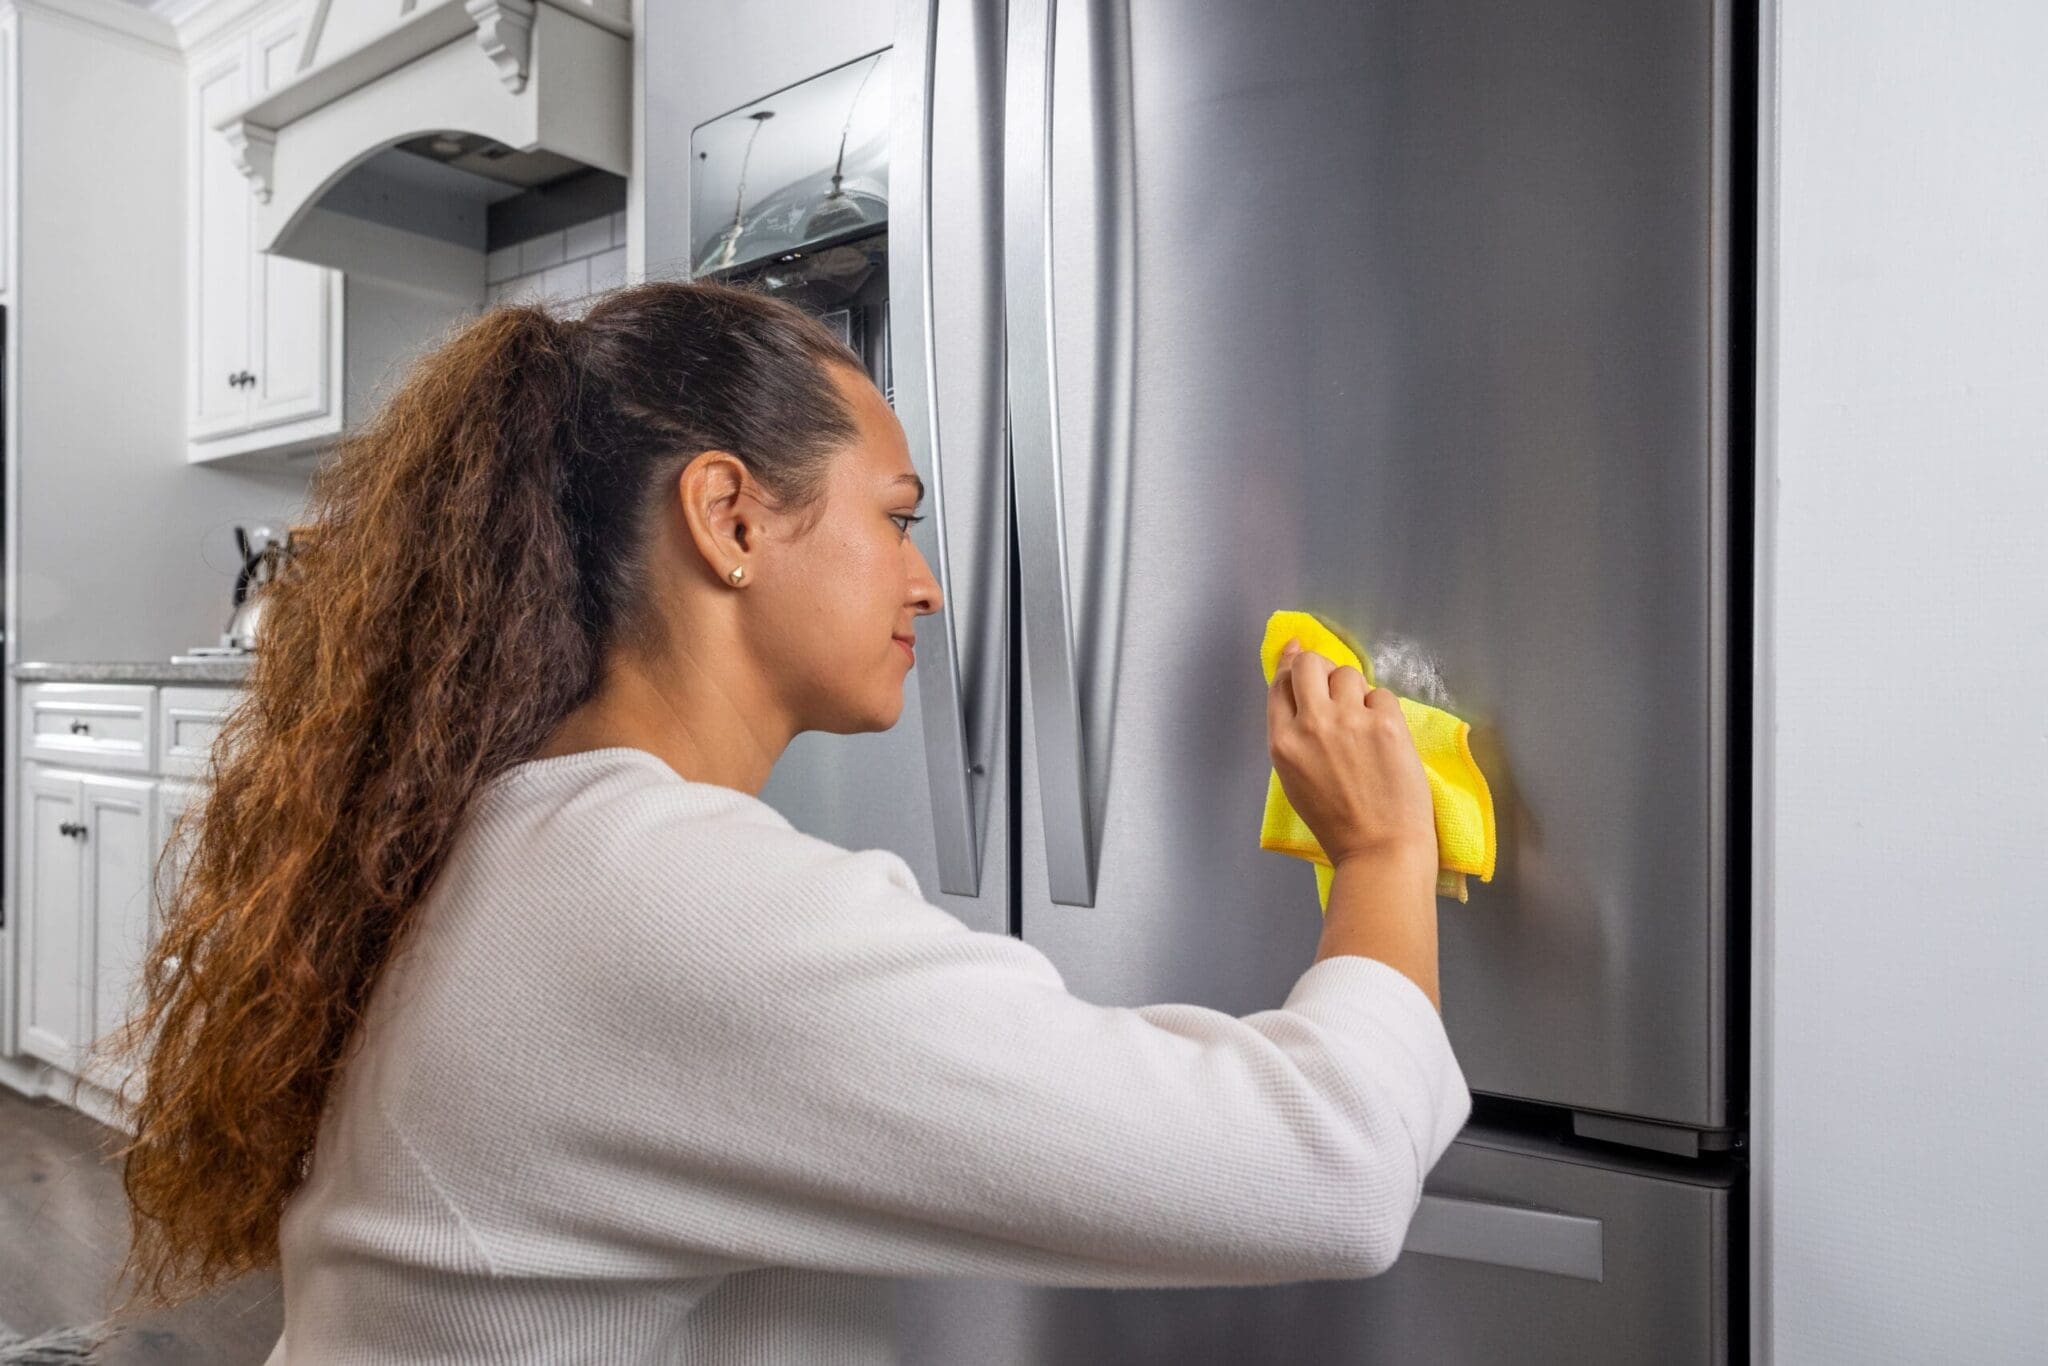 Woman removing sticker residue from fridge using Goof Off